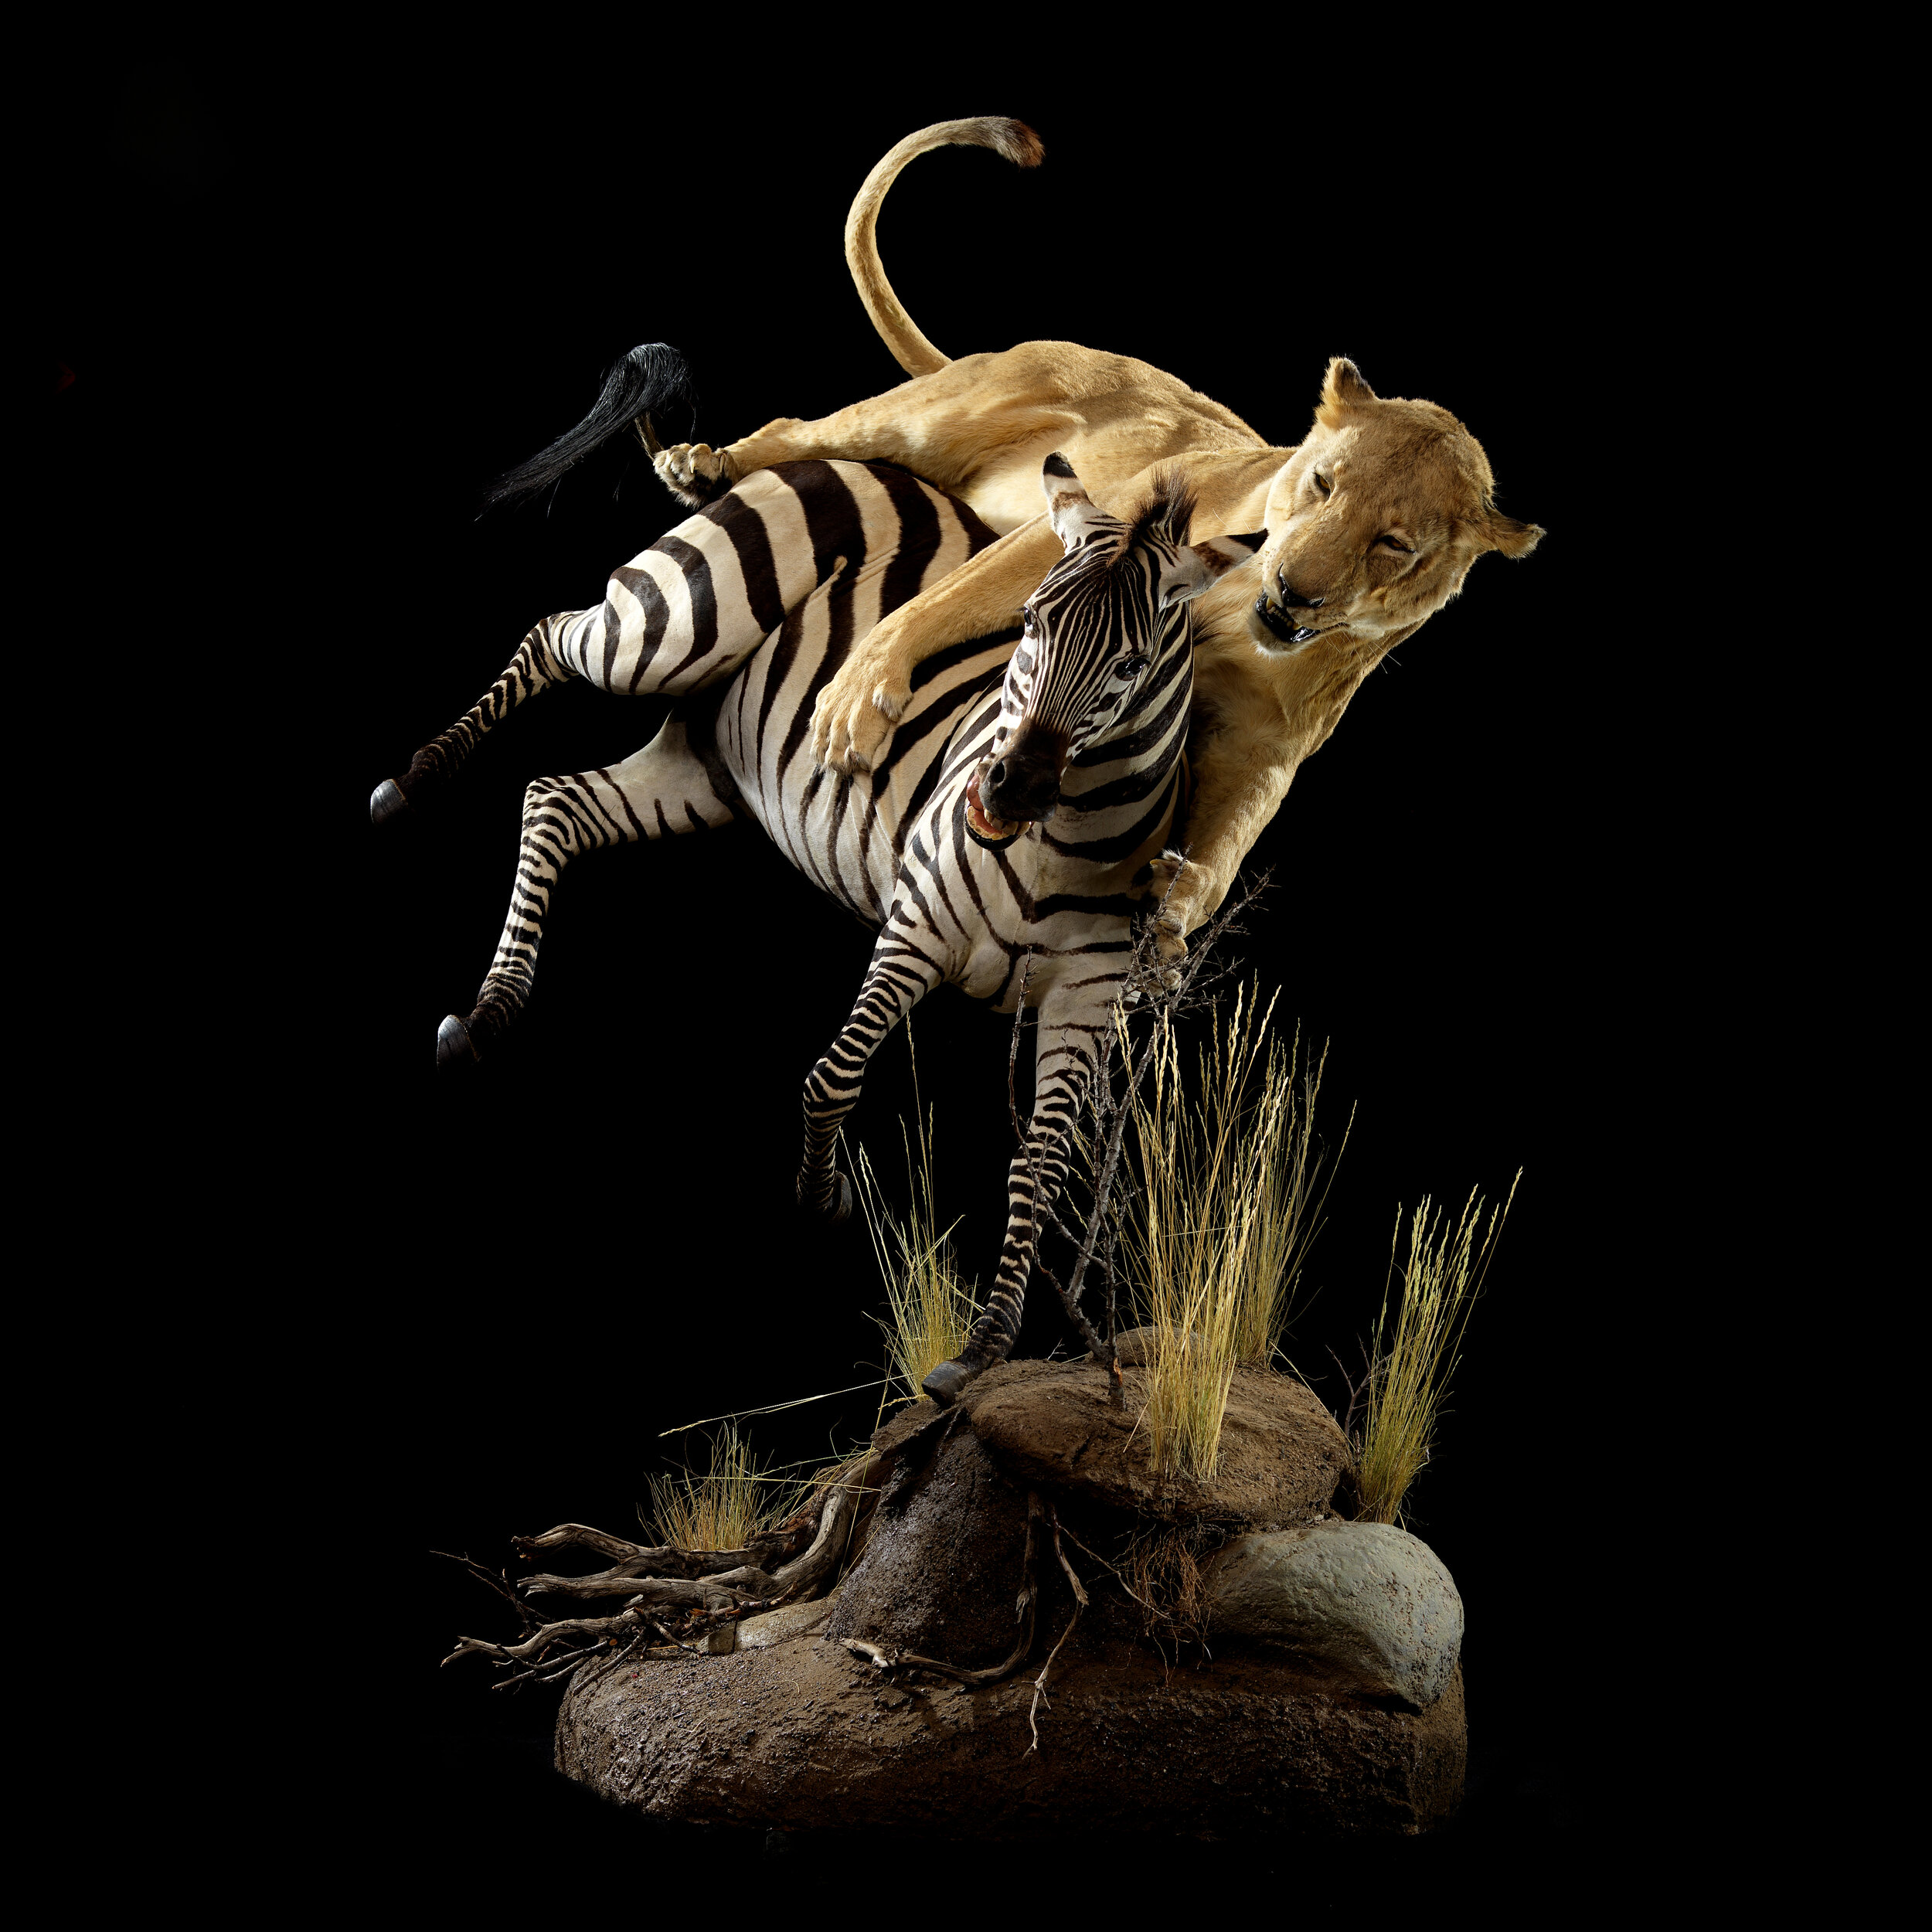 Do You Need African Taxidermy for African Animals? — Animal Artistry